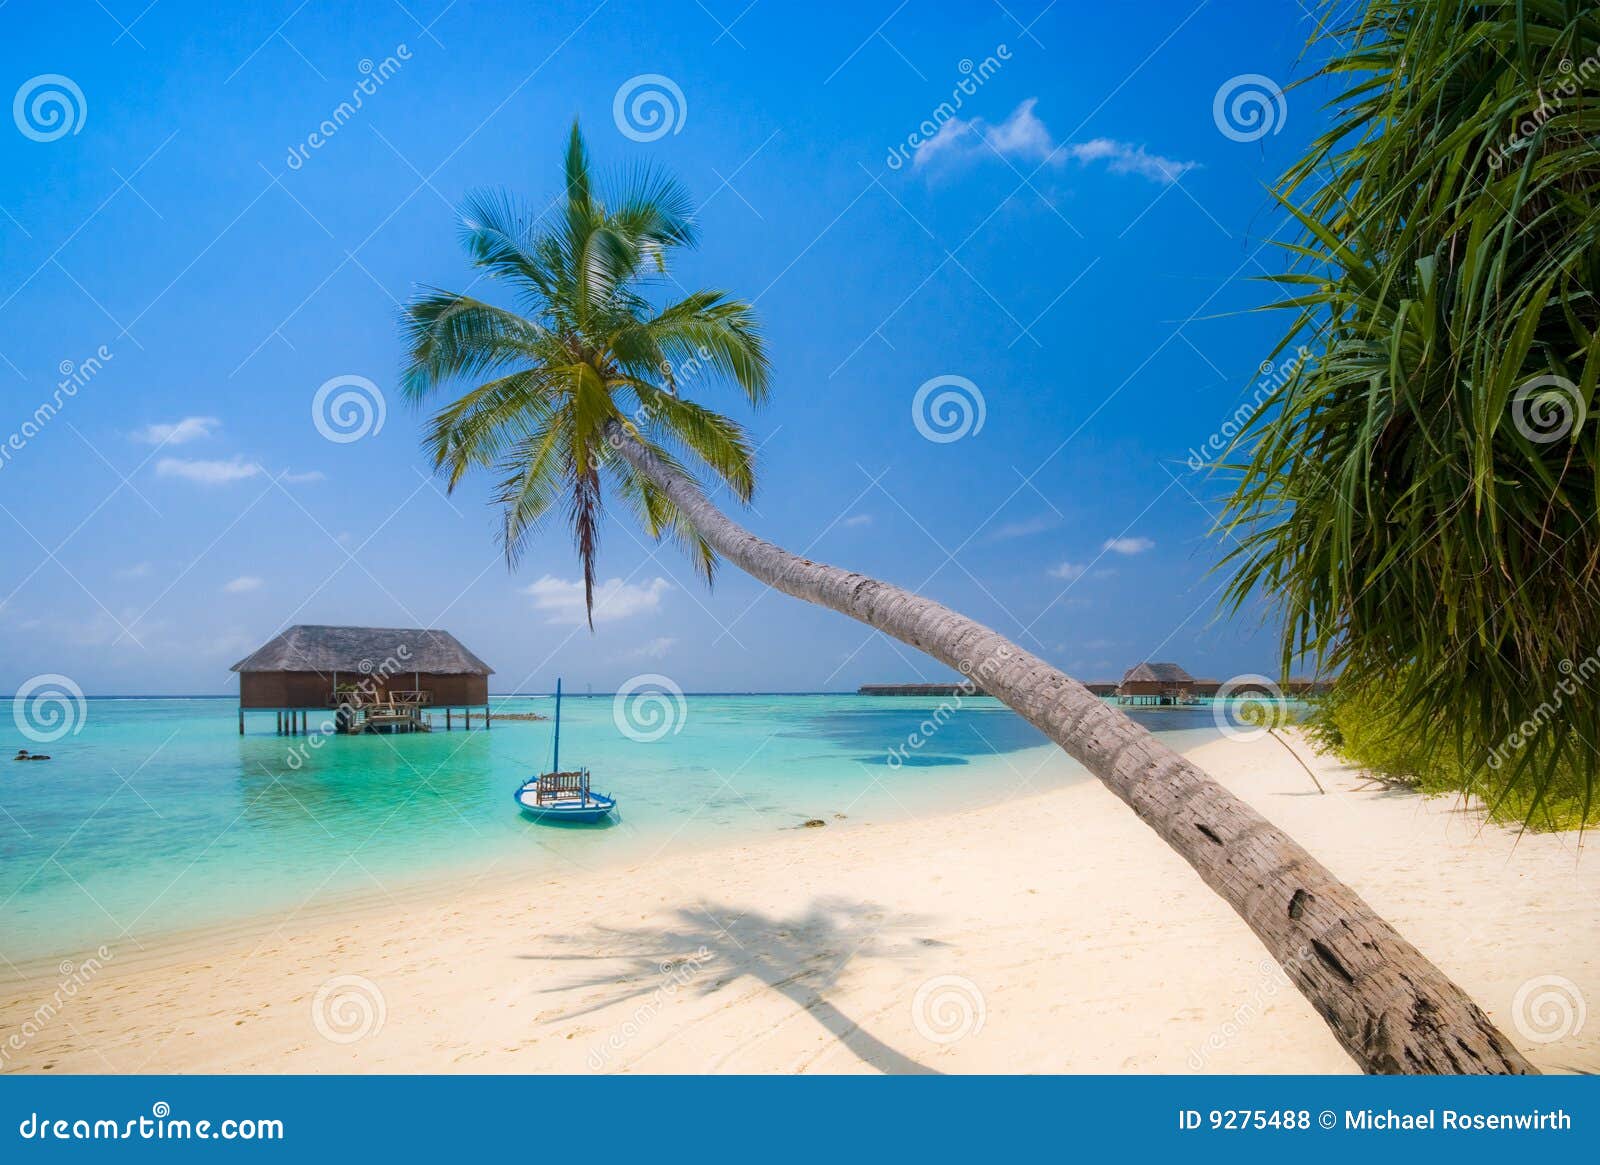 Tropical beach scenery stock photo Image of relaxation 